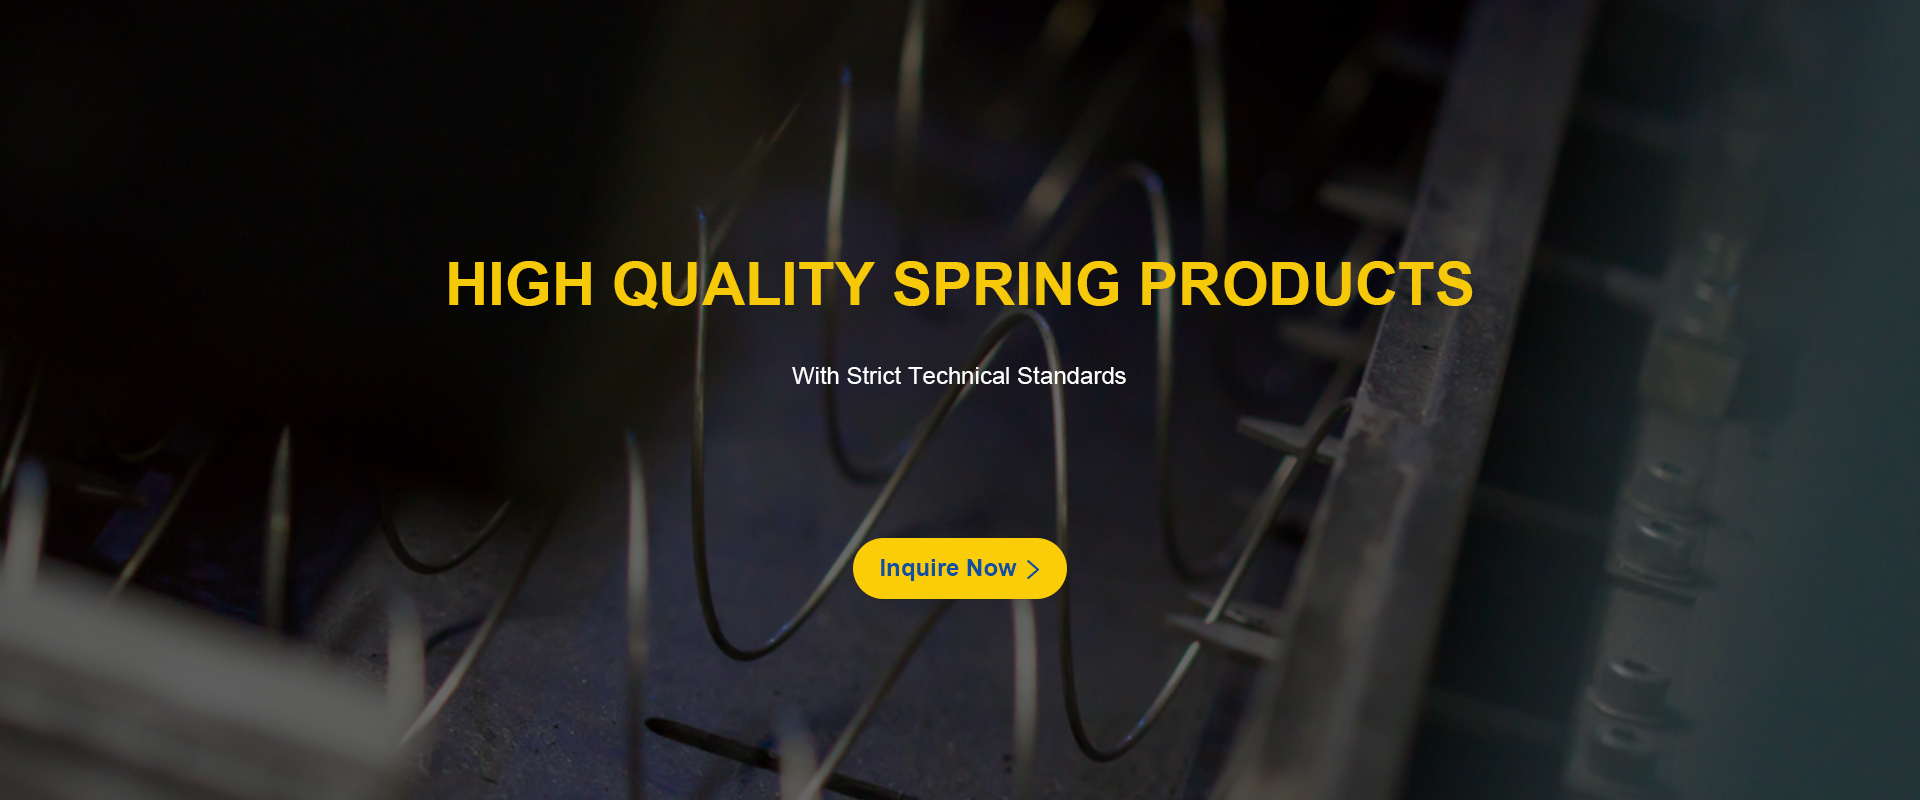 High Quality Spring Products